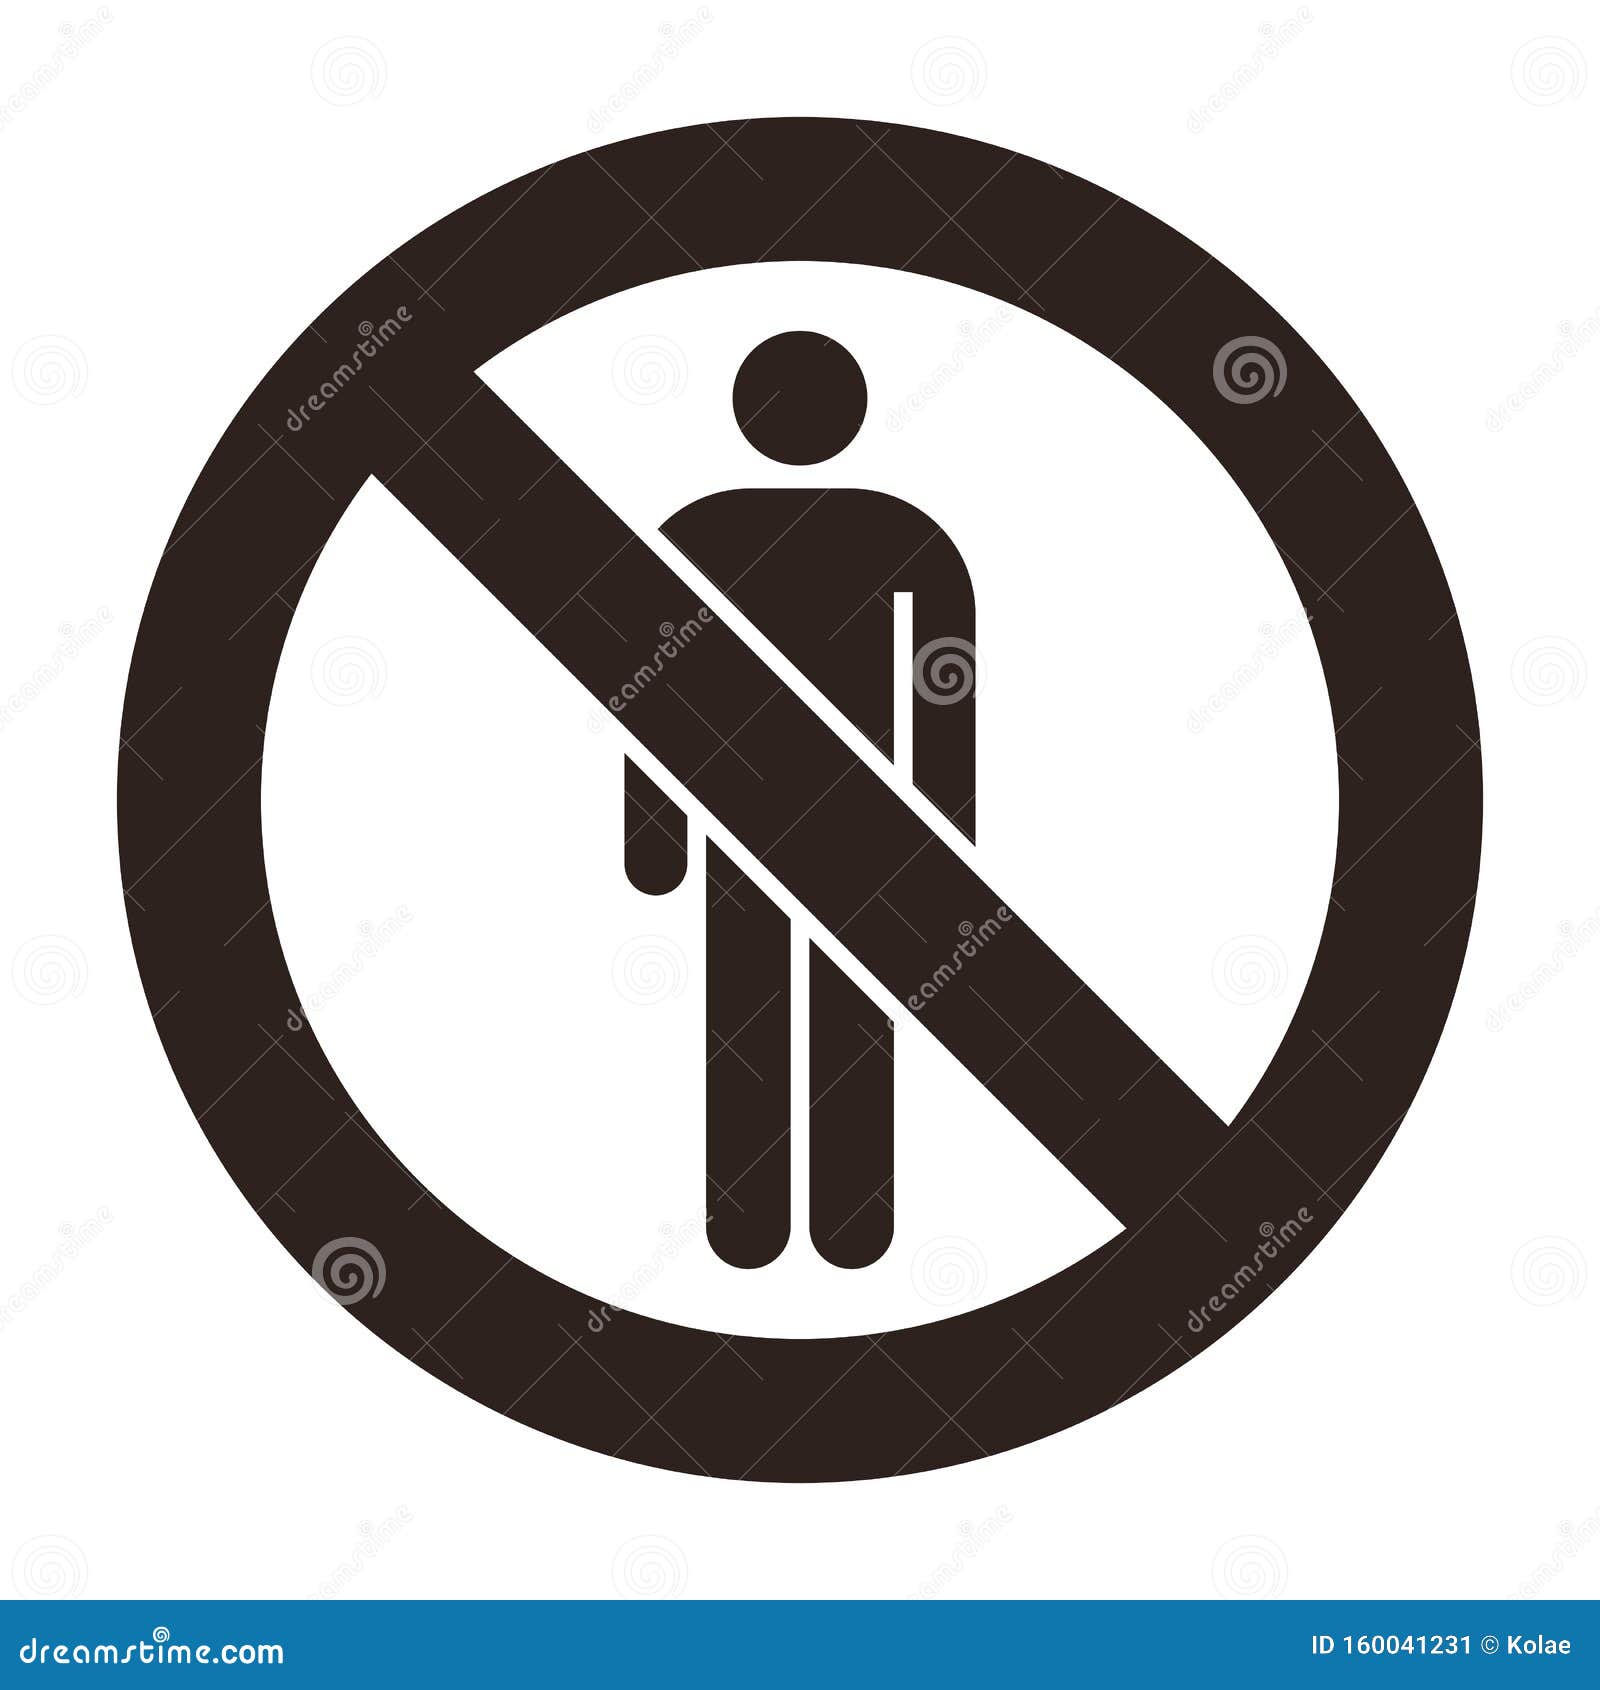 No People Allowed No Man Sign Stock Vector Illustration Of Symbol